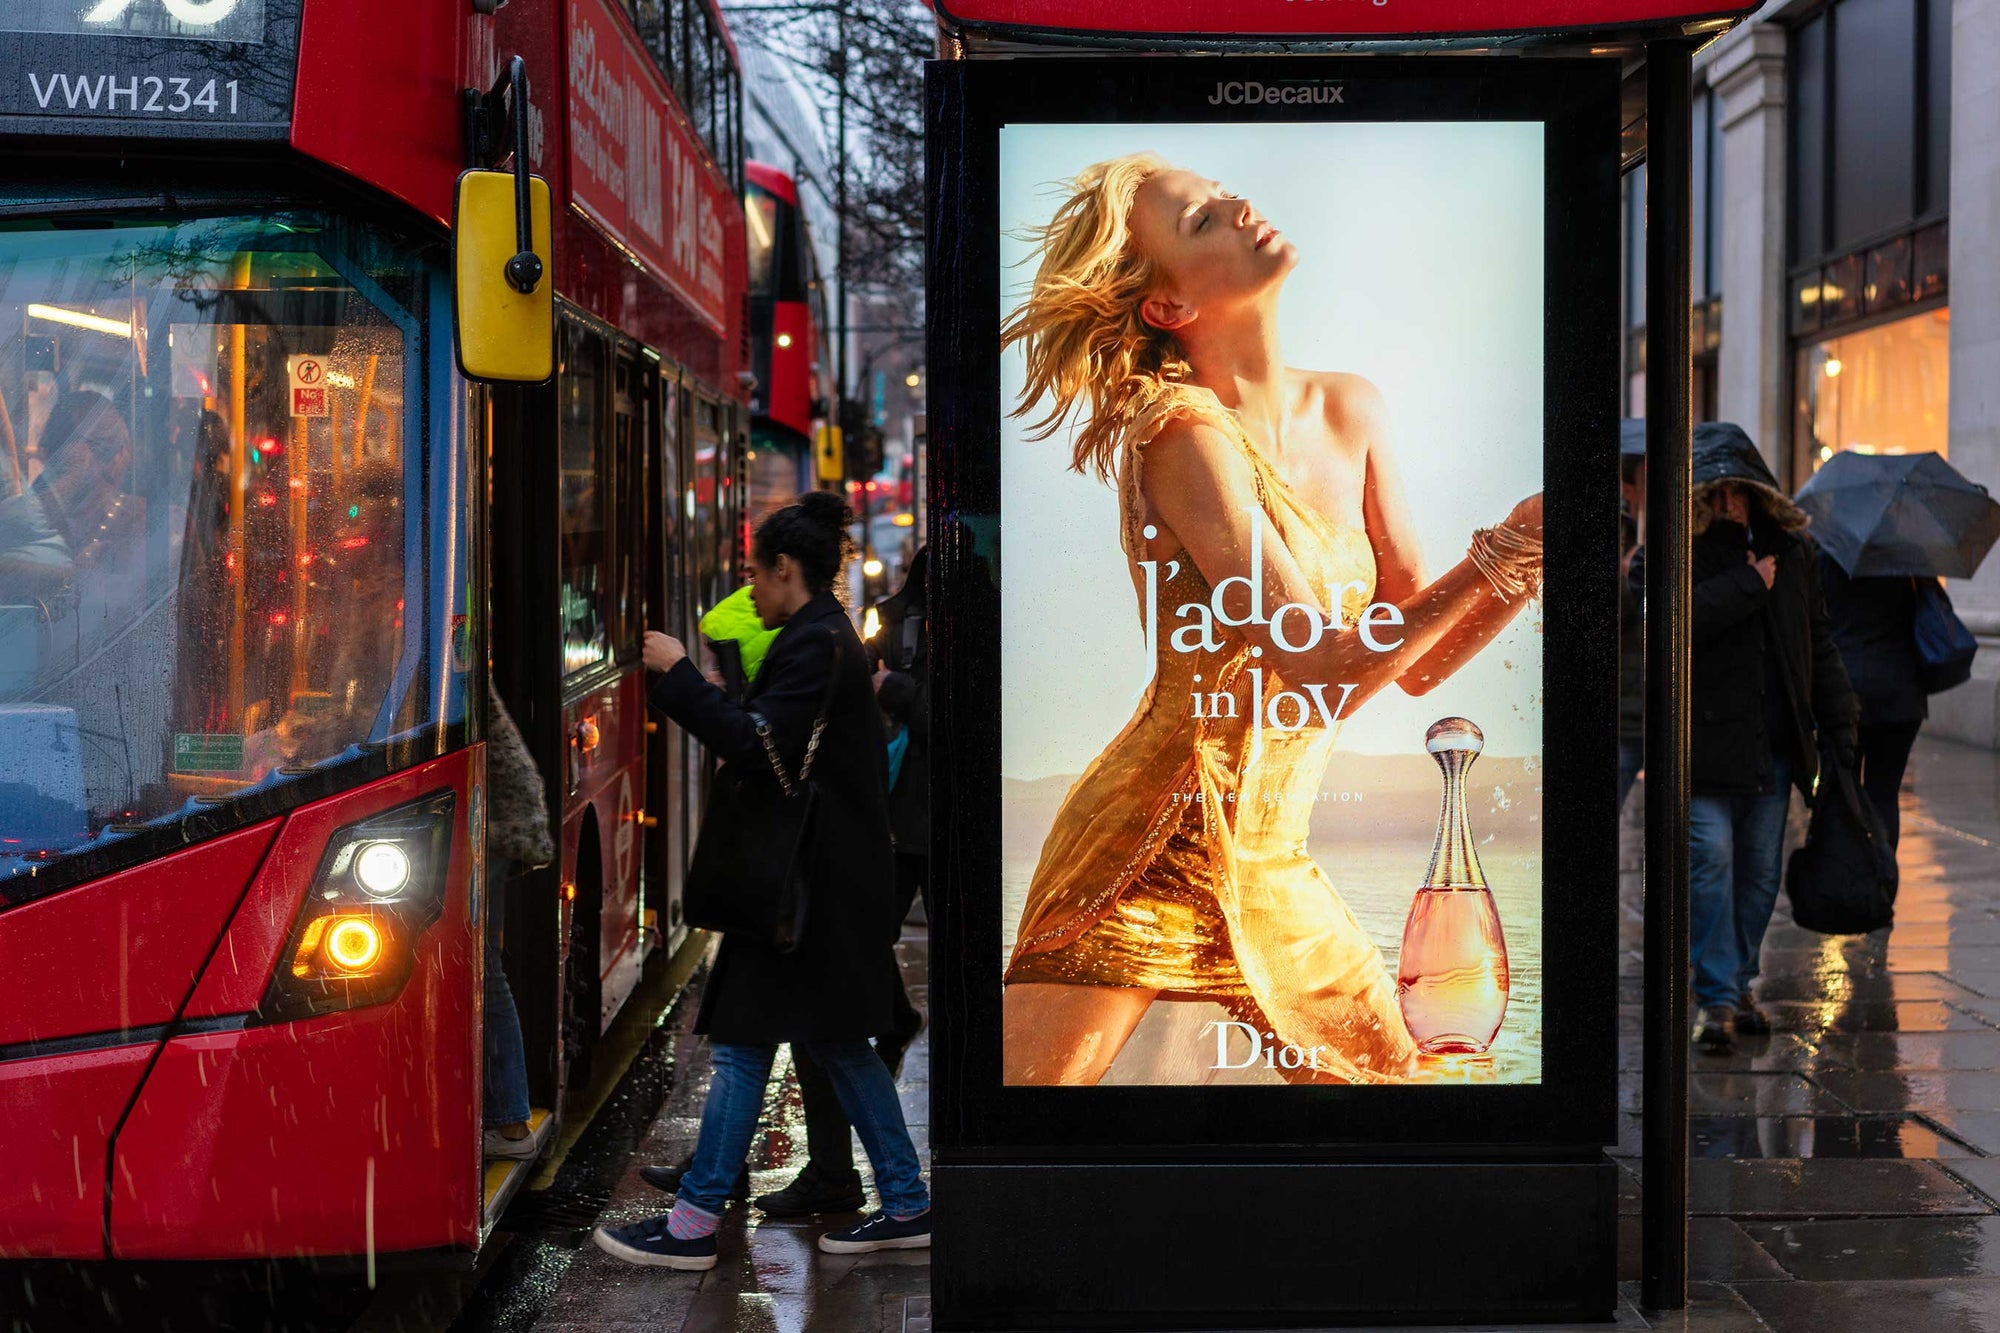 bus stop on rainy day with perfume advertisement showing woman in golden dress